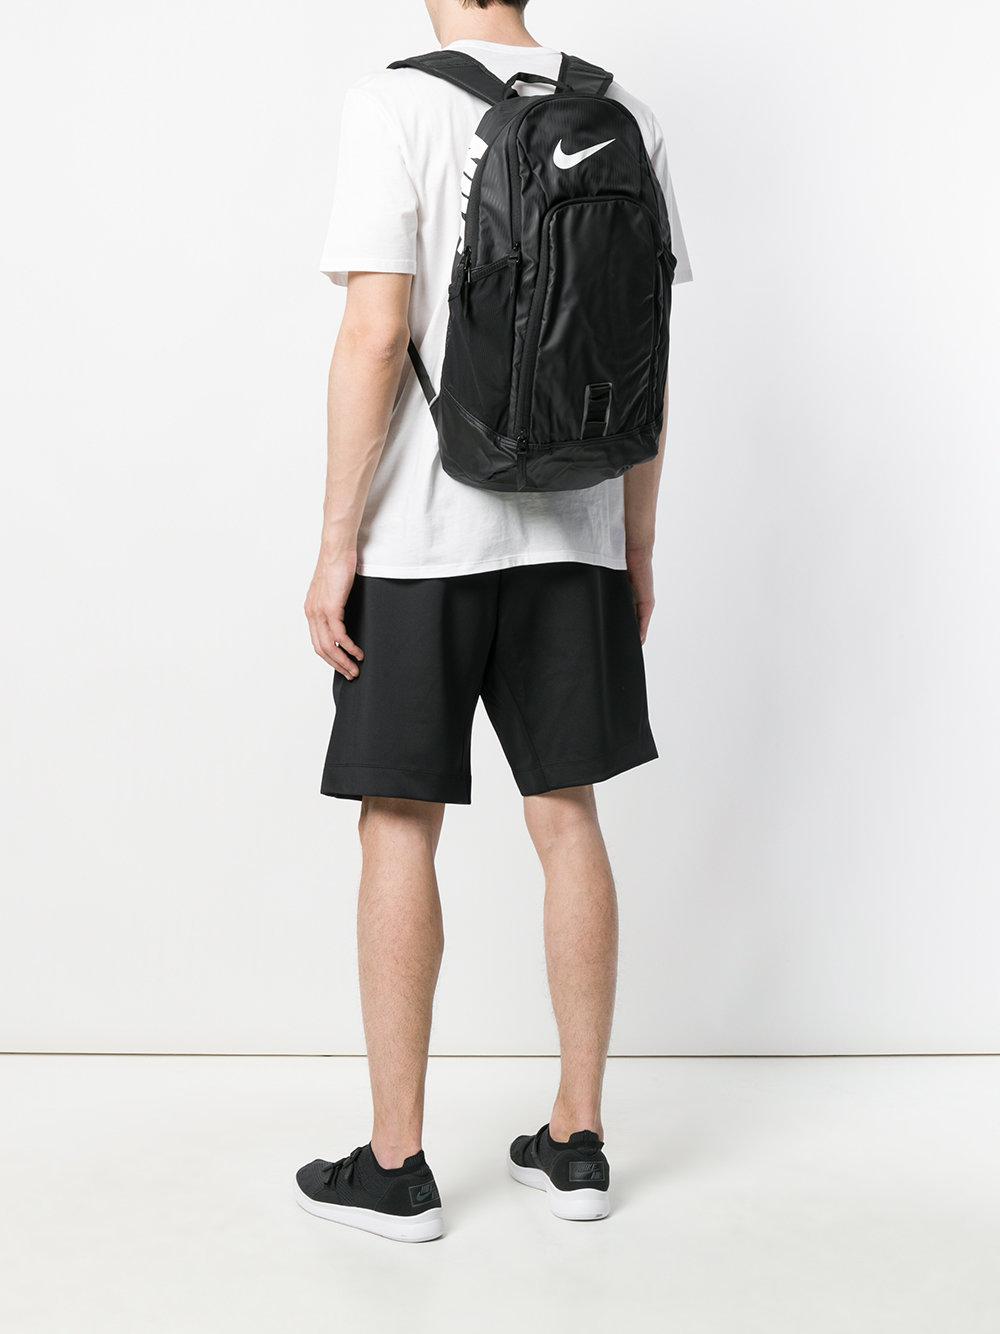 spade Potatoes Diplomatic issues nike alpha adapt rise backpack size  Dinkarville Stable click